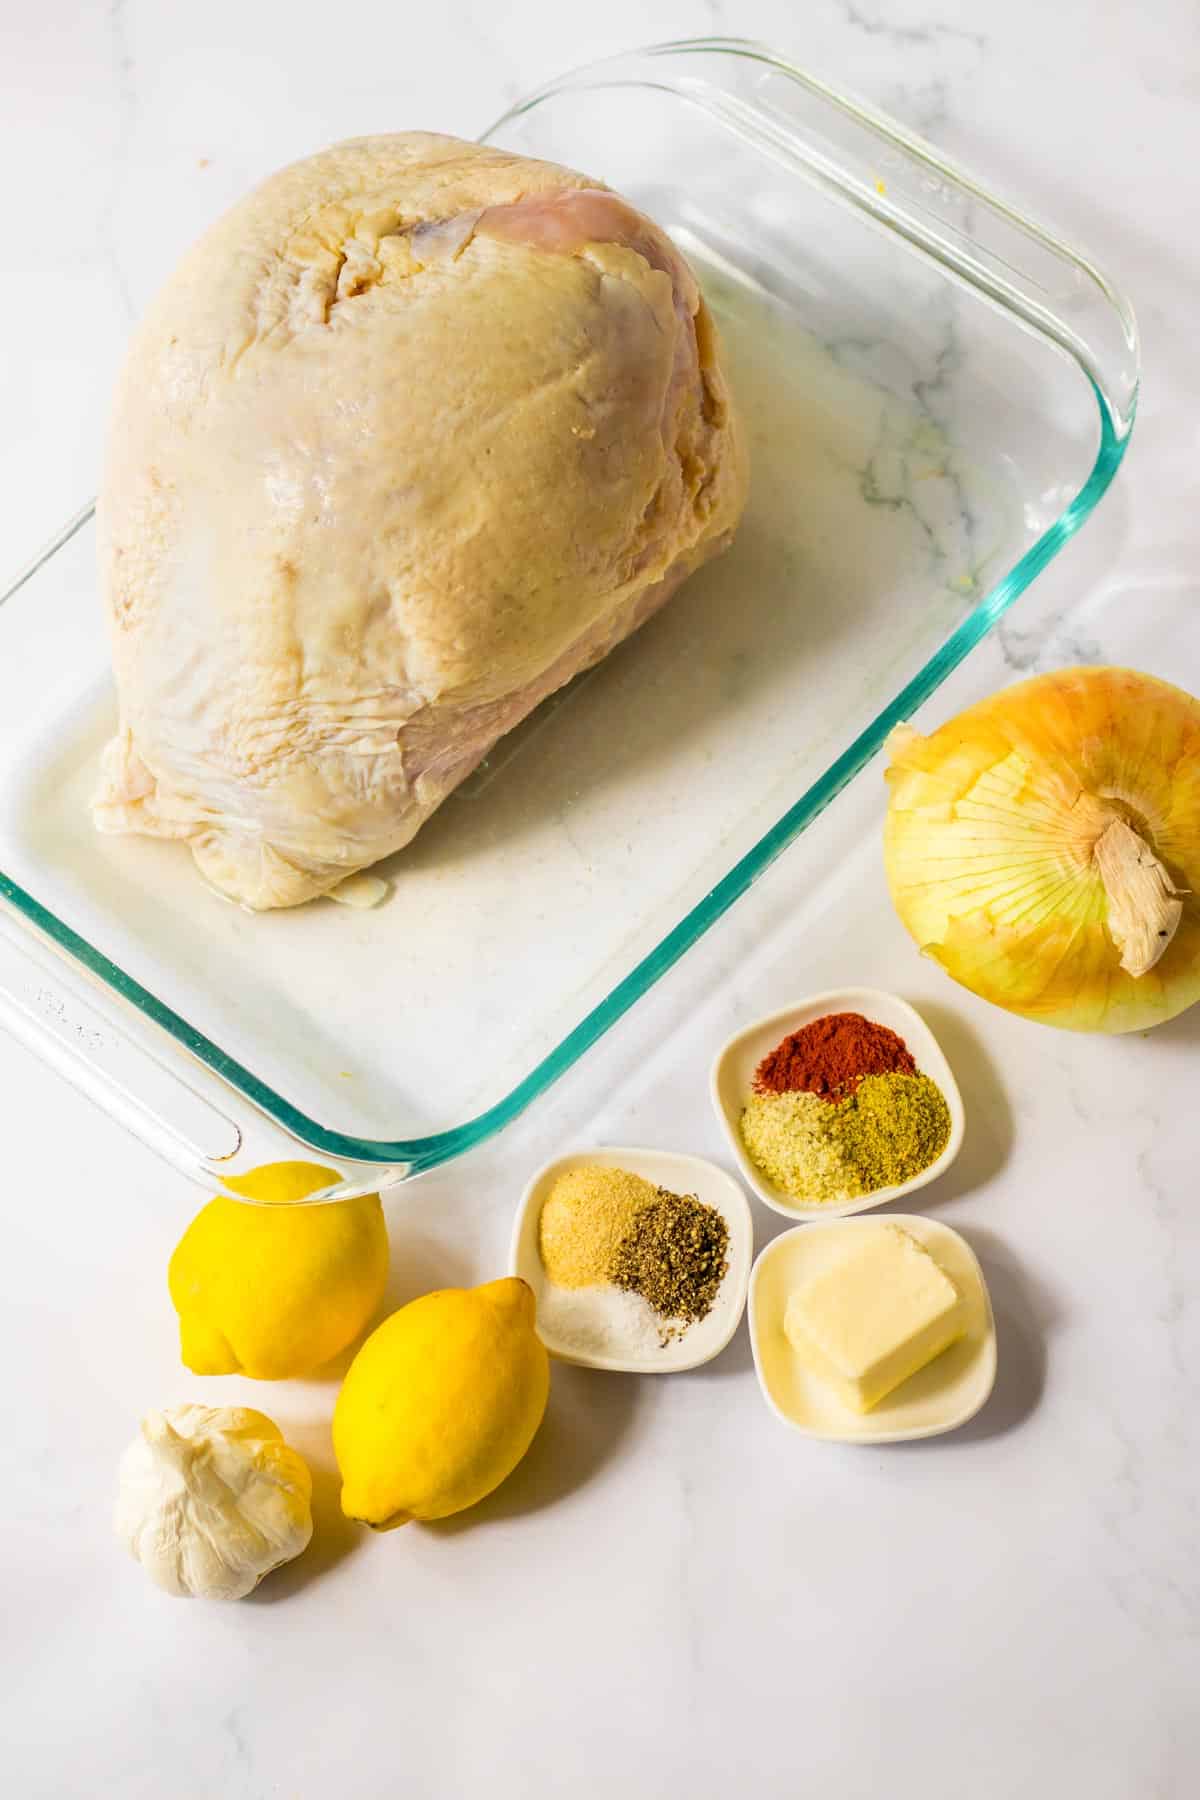 A glass dish with a roasted chicken, lemons, and other ingredients.